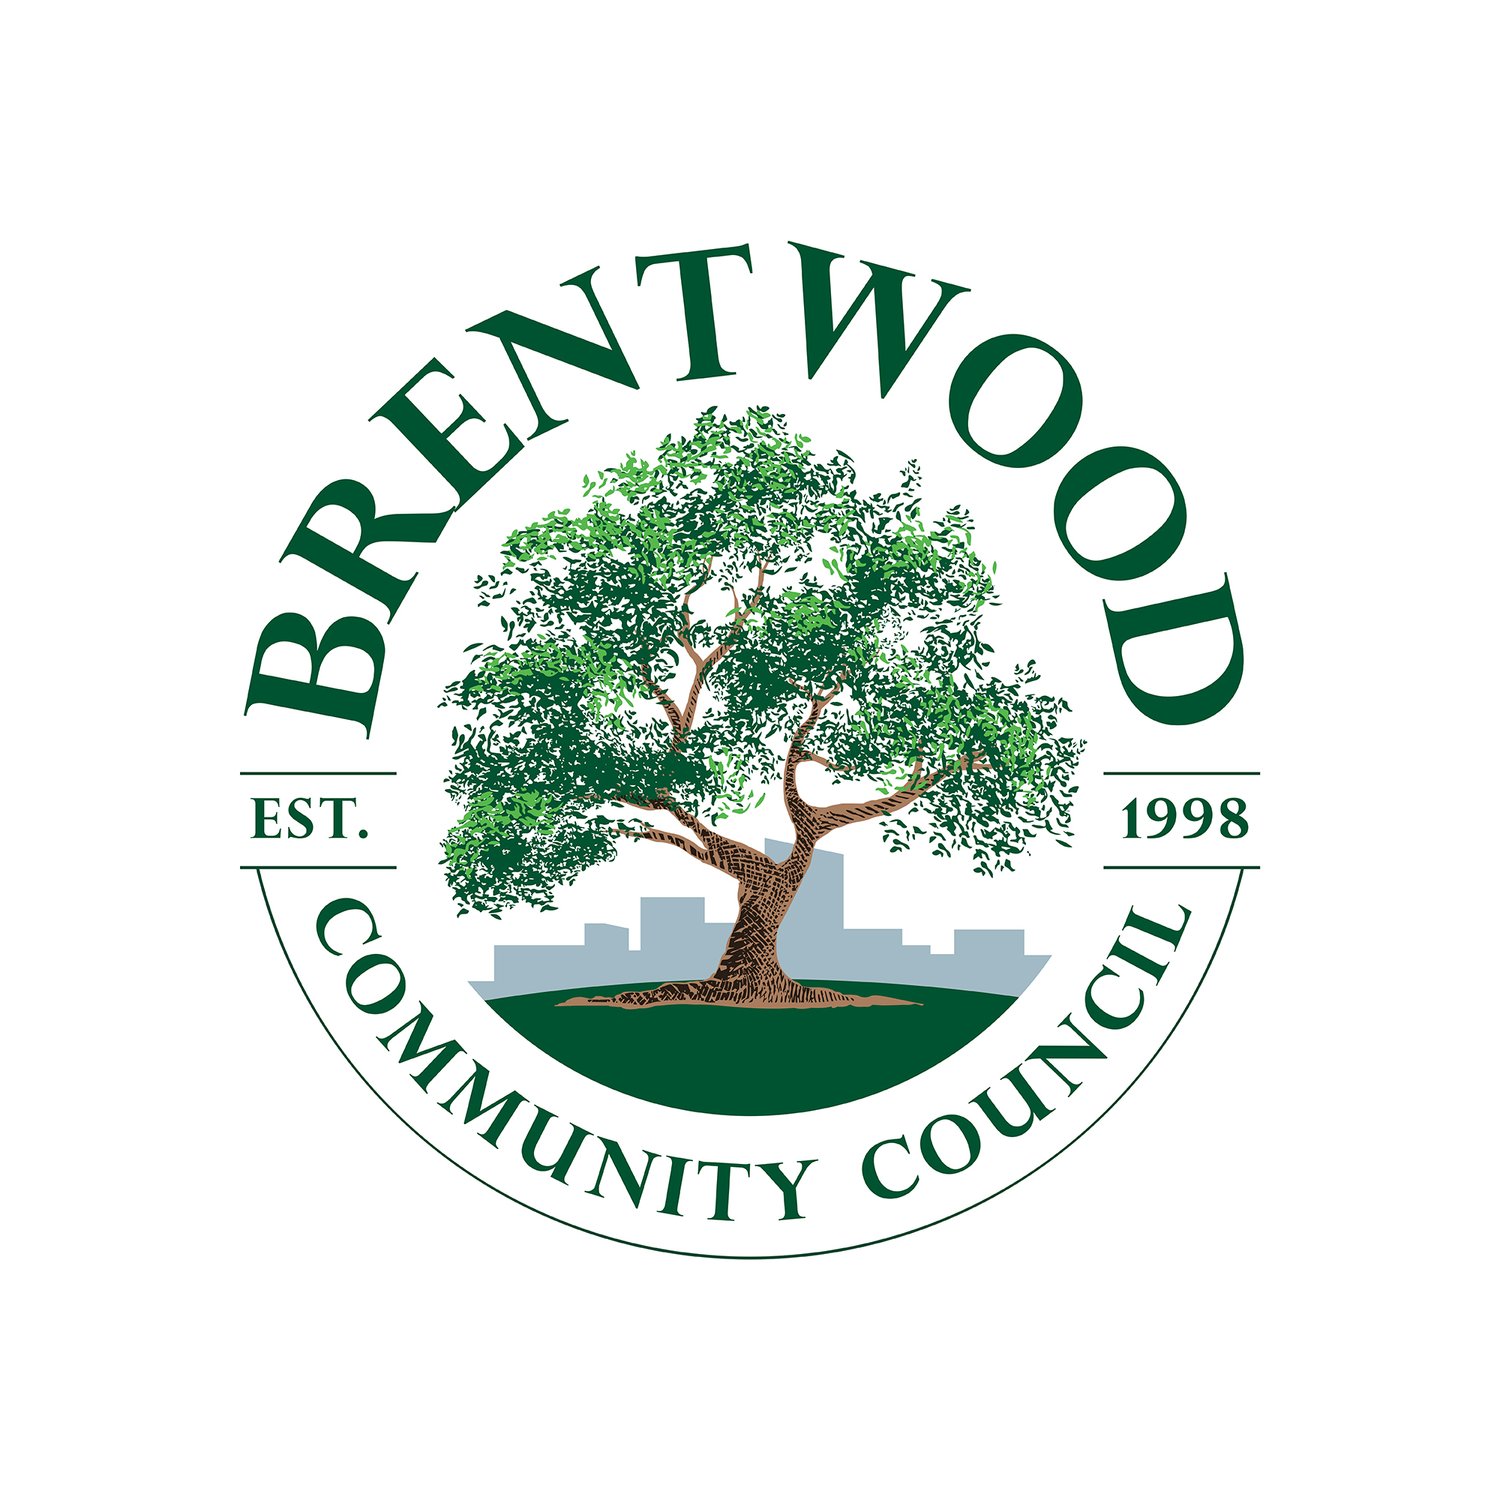 Brentwood Community Council